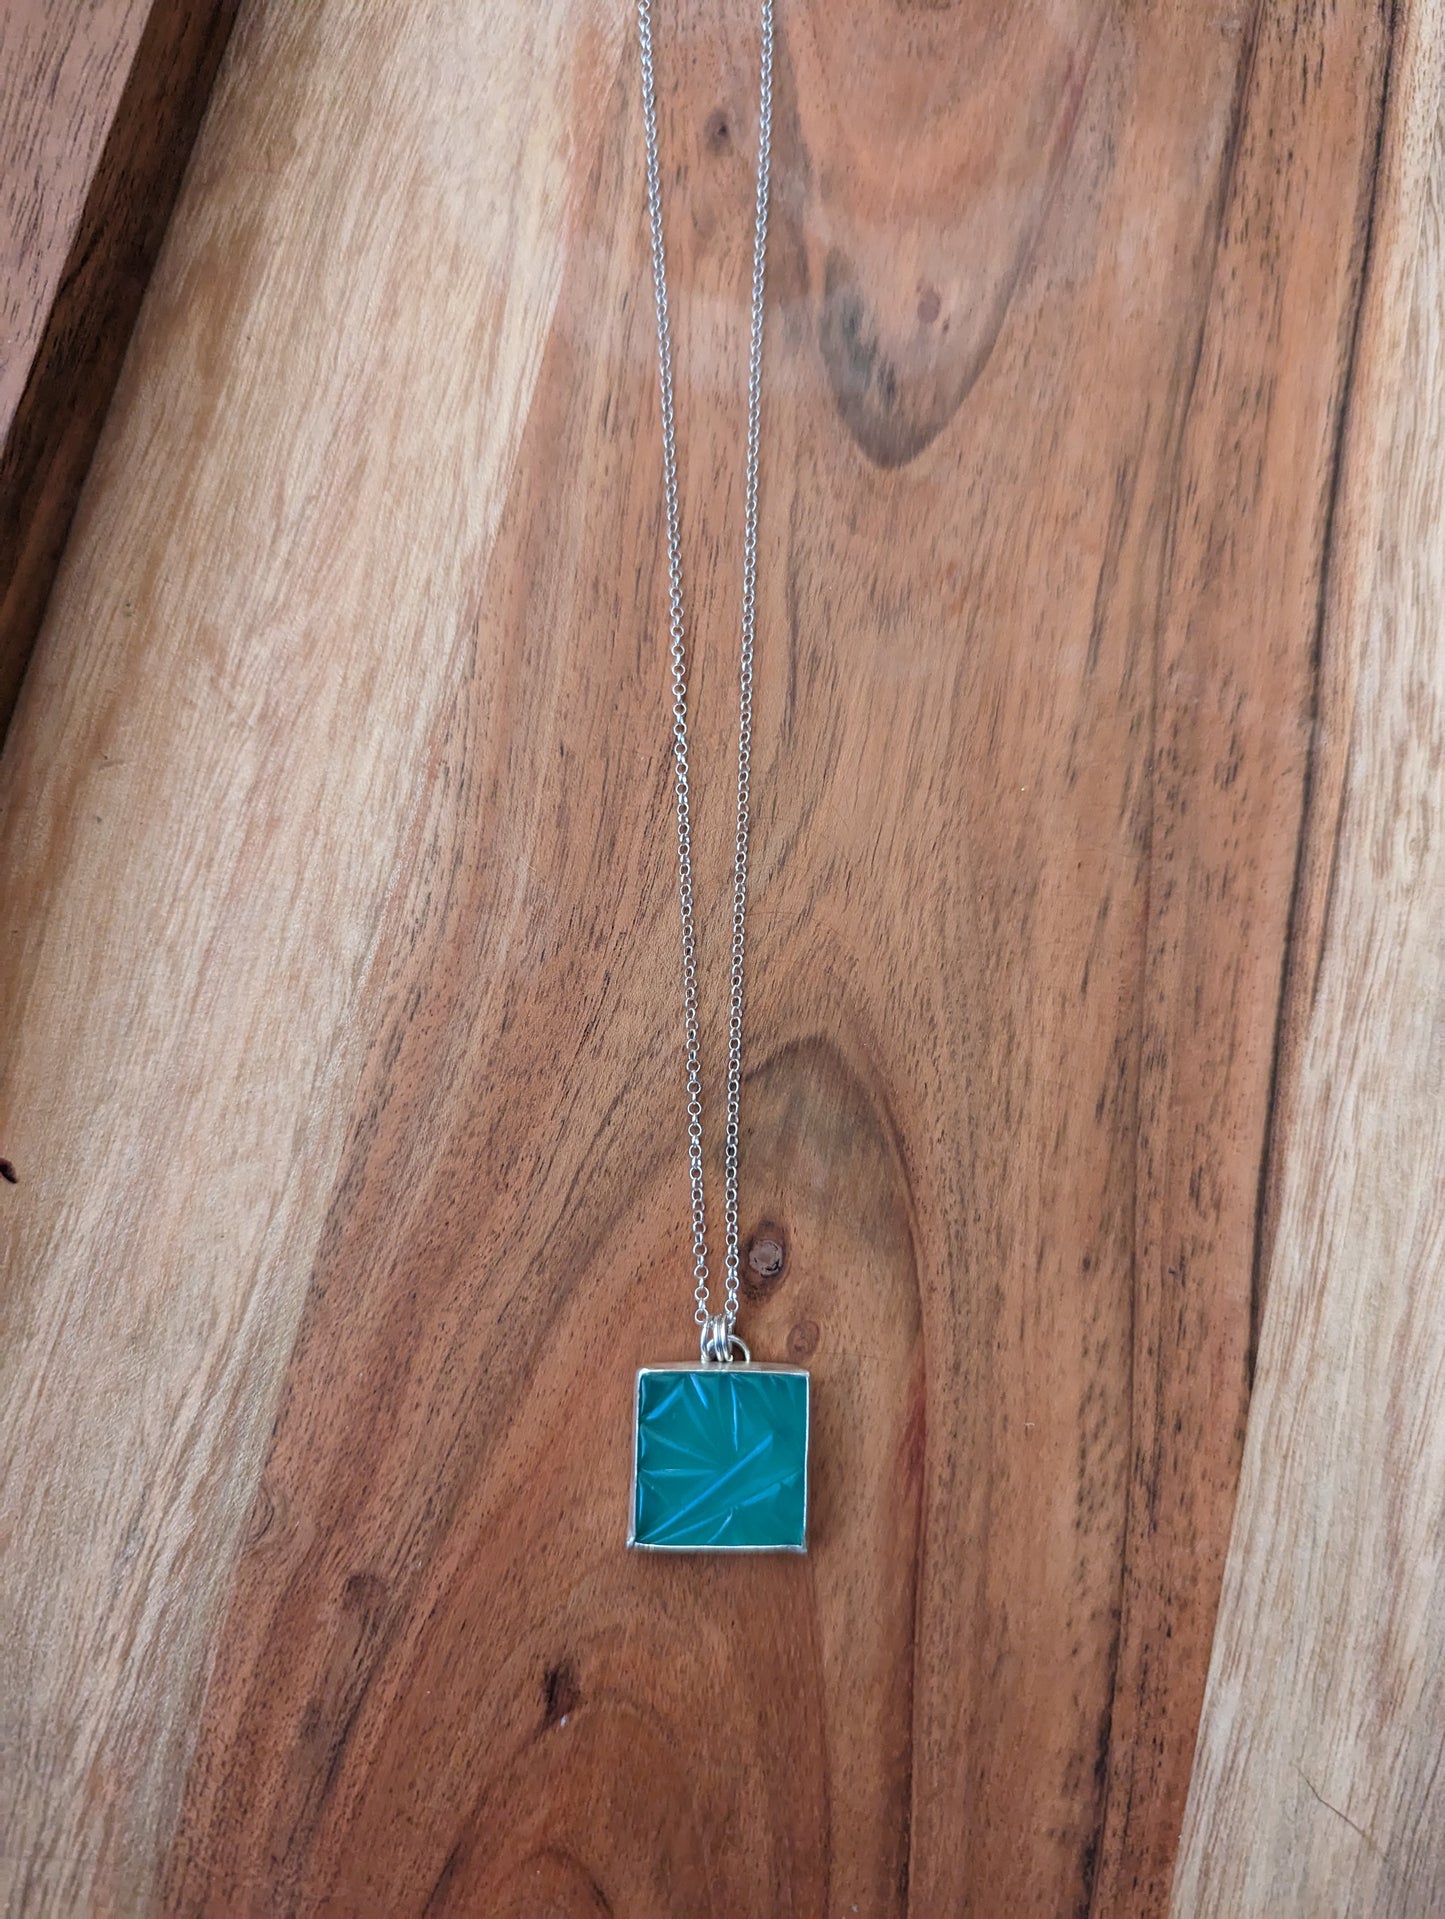 Carved Aqua Chalcedony Square in Sterling Silver Necklace MTO